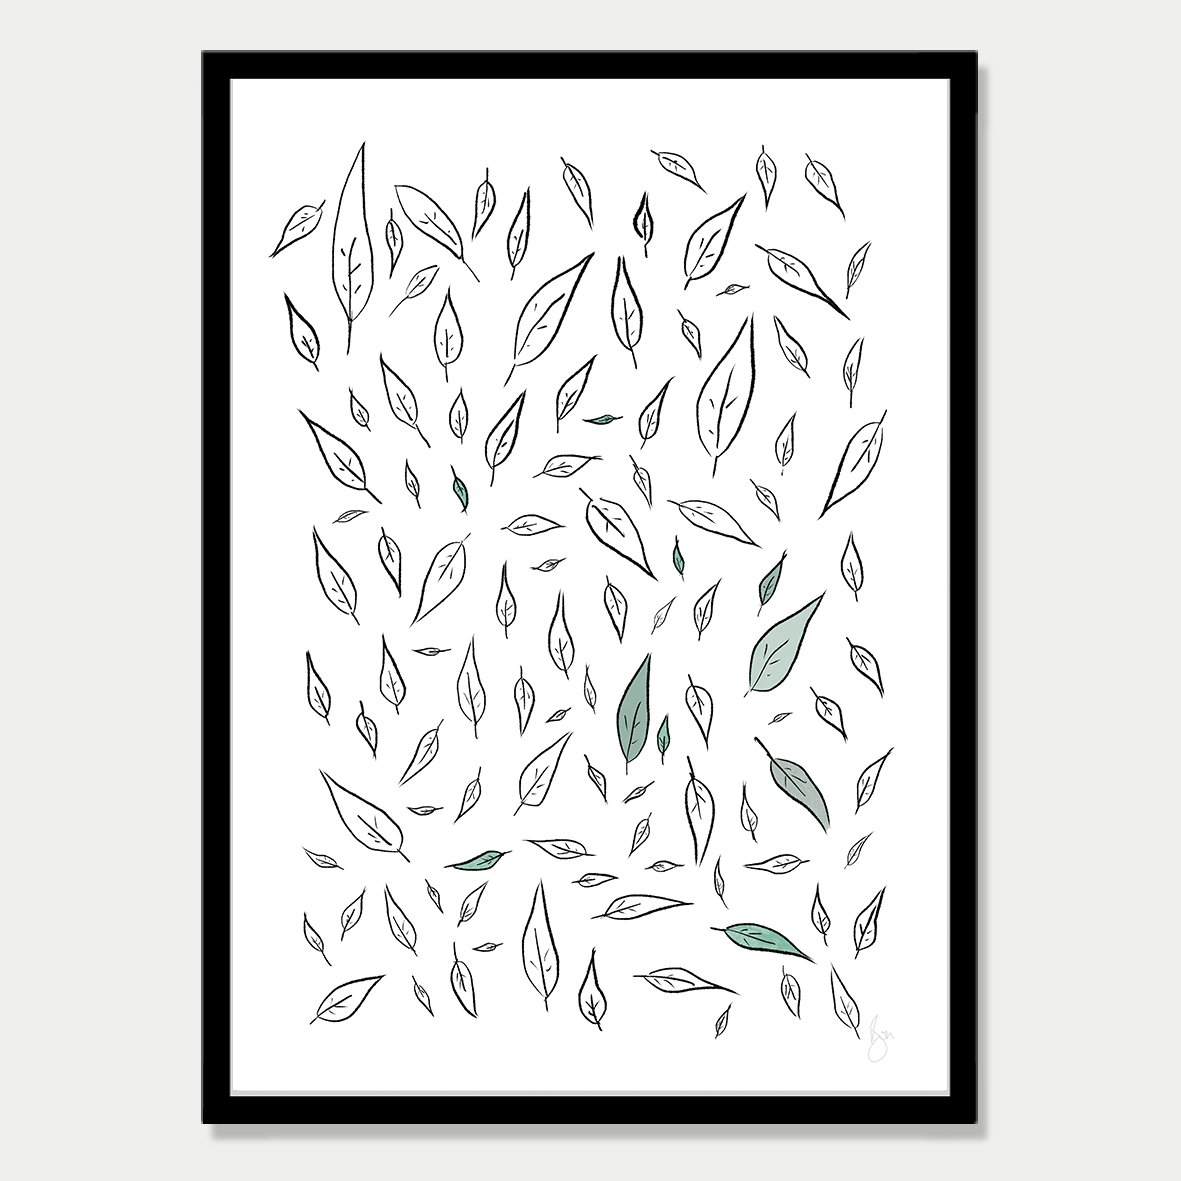 This art print is a playful minimal illustration of leaves, by Bon Jung. Printed in New Zealand by endemicworld and framed in black.